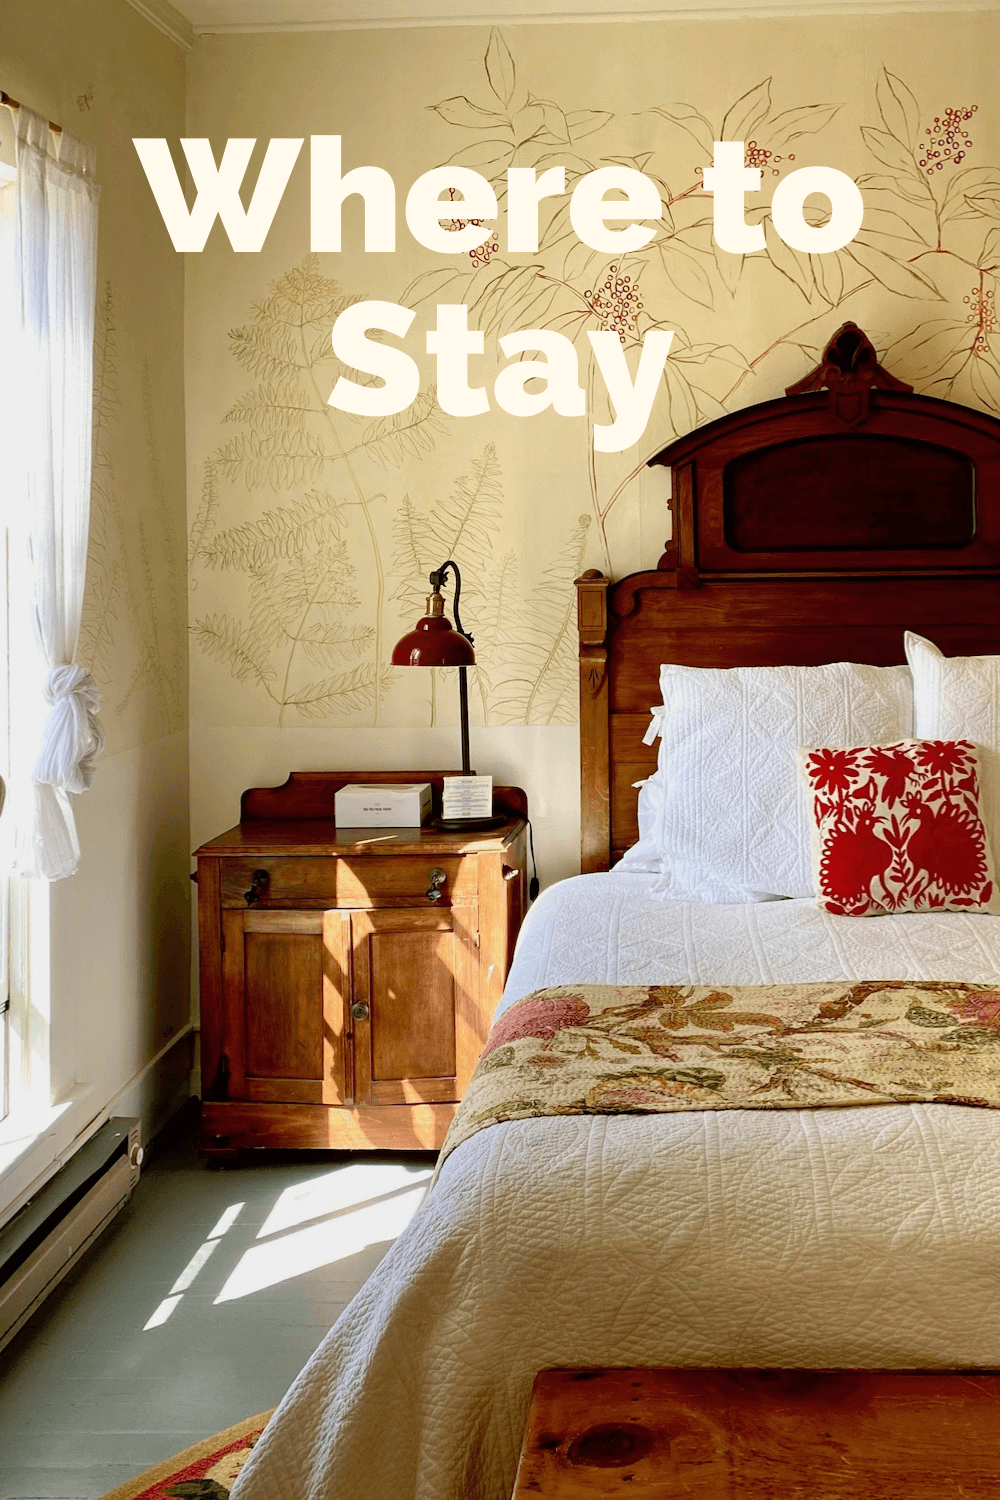 A hotel room sees sun shining through a full length window onto an antique bed frame with a cream colored wall with etched artwork.